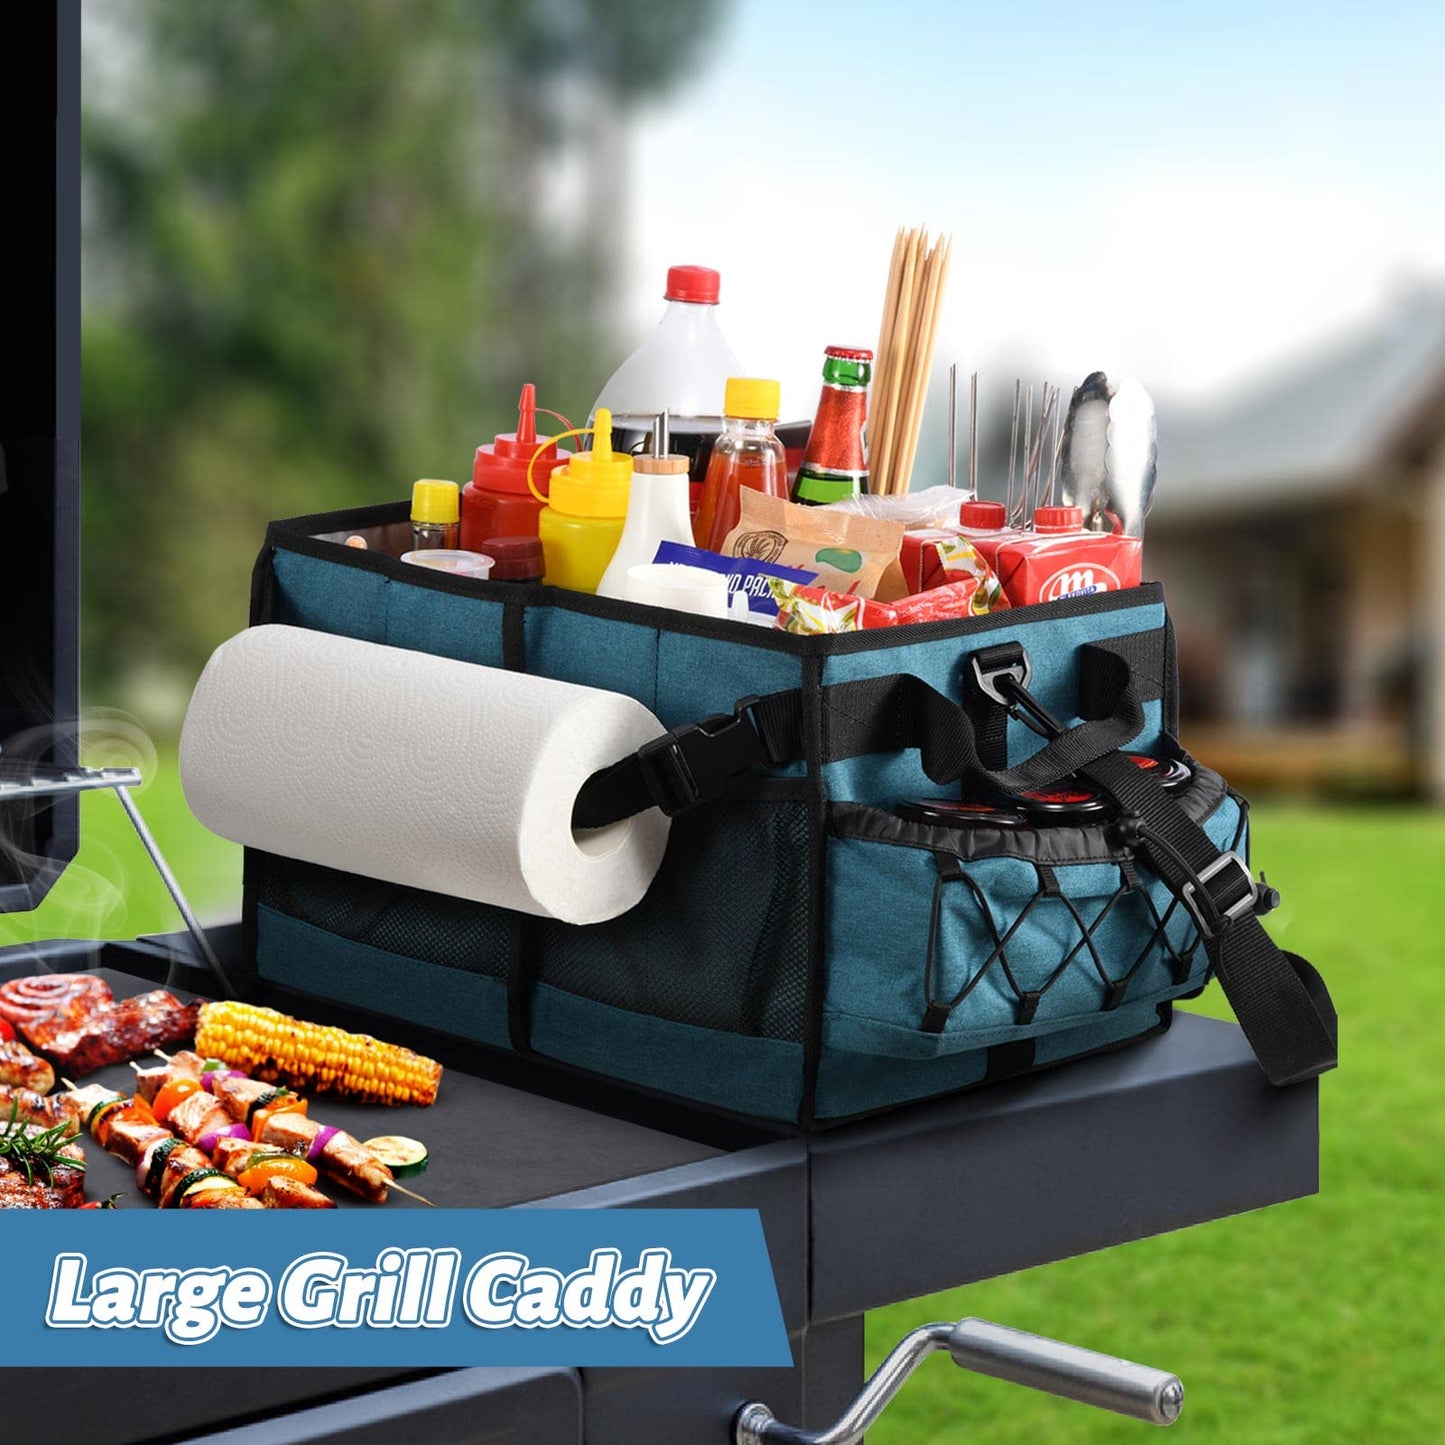 Lorbro Grill Caddy, BBQ Caddy with Paper Towel Holder, Utensil Caddy with Condiment Pocket, Collapsible Picnic Basket Camping Gear Must Haves for Outdoor, Gift, Grilling Tool, Barbecue, RV